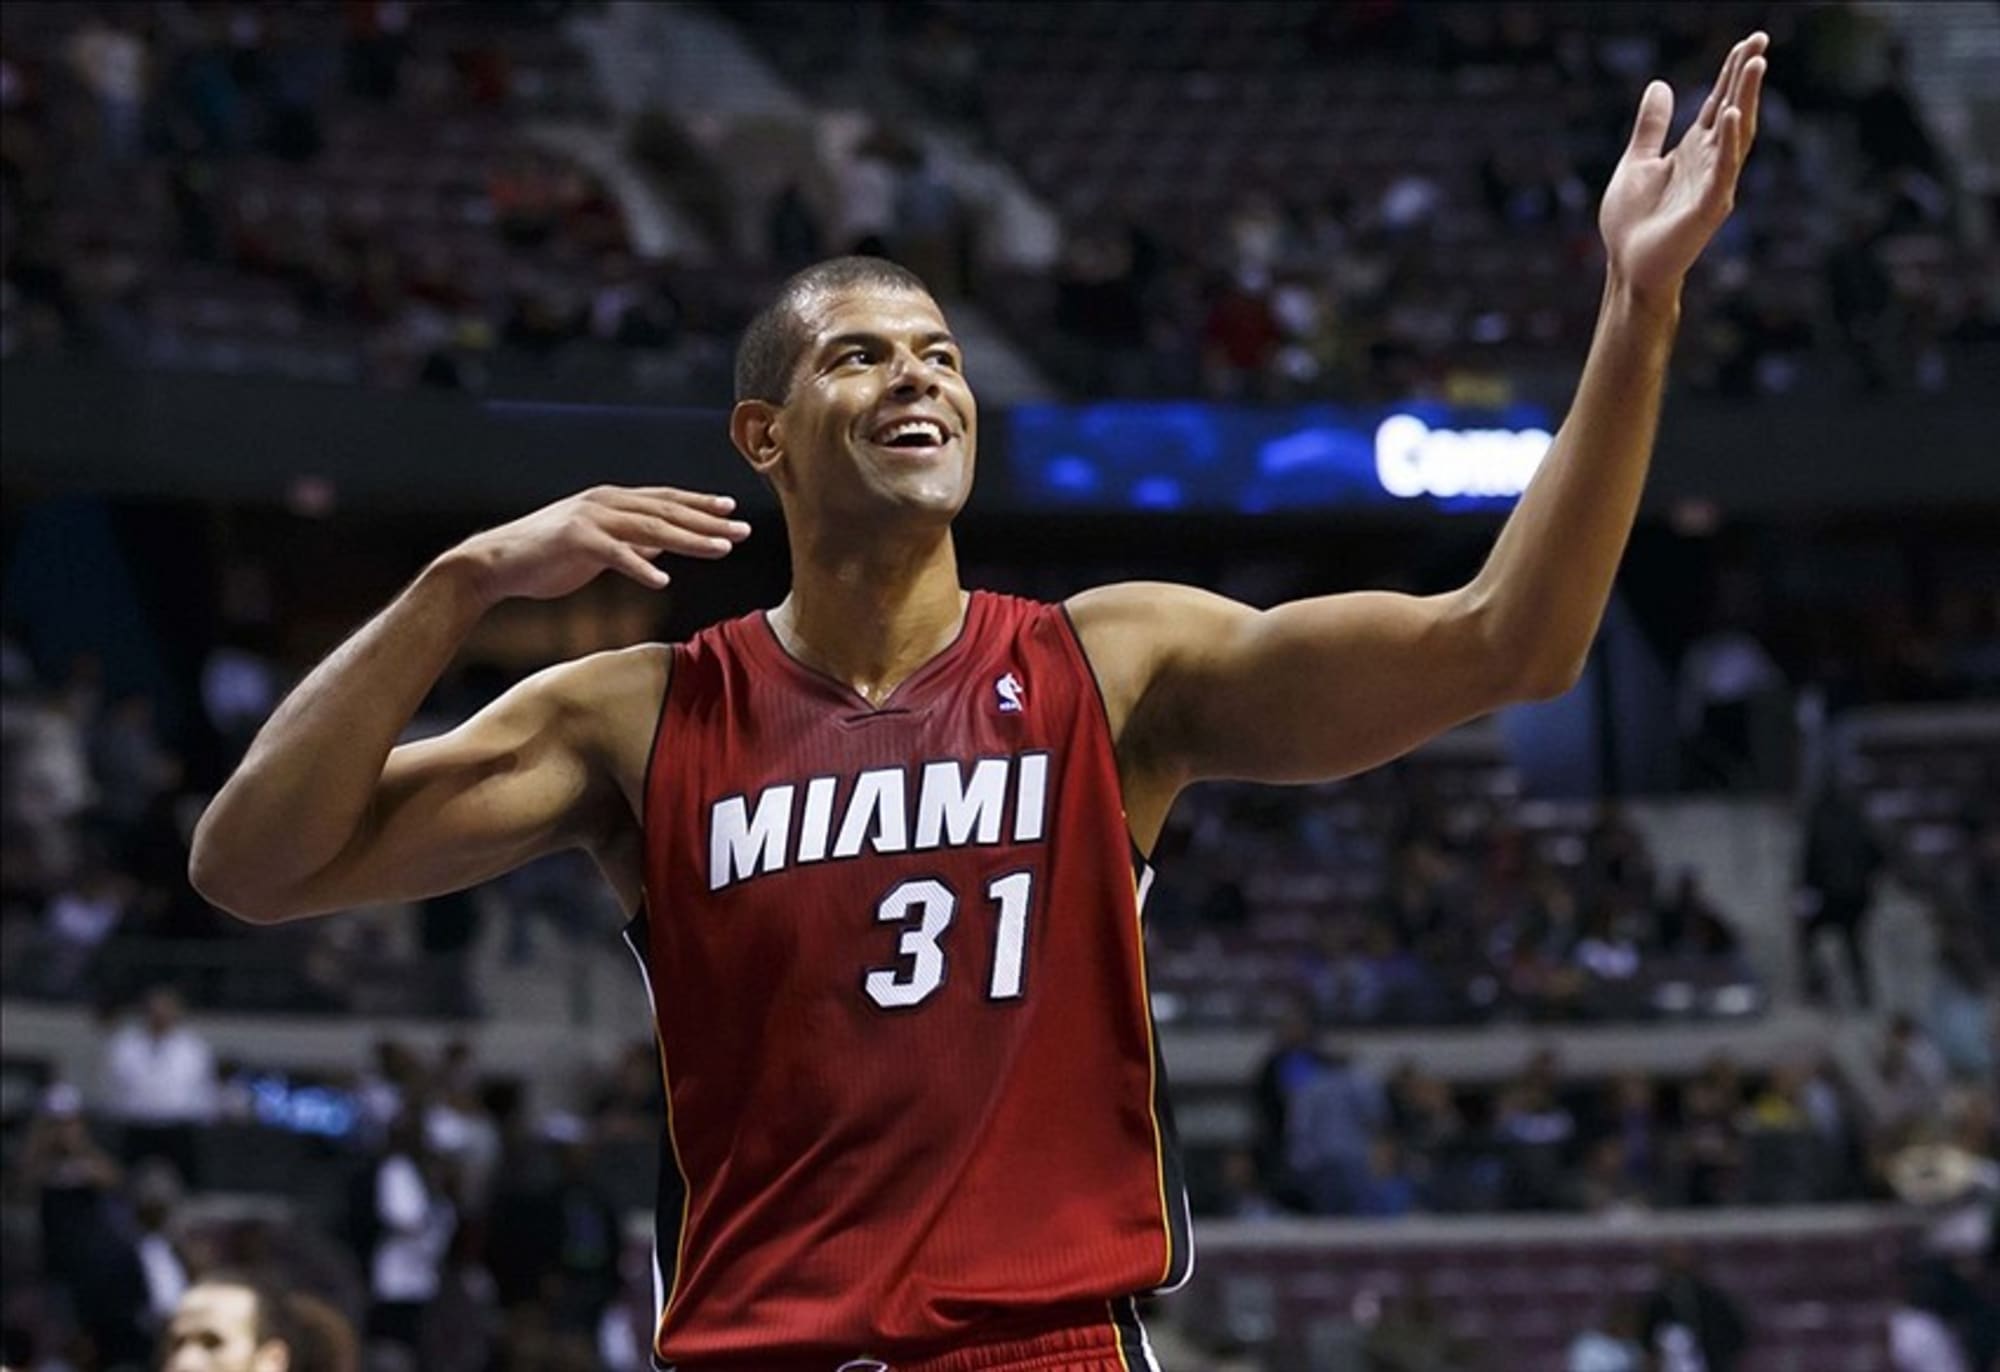 Shane Battier's view of the Miami Heat: Play together, win